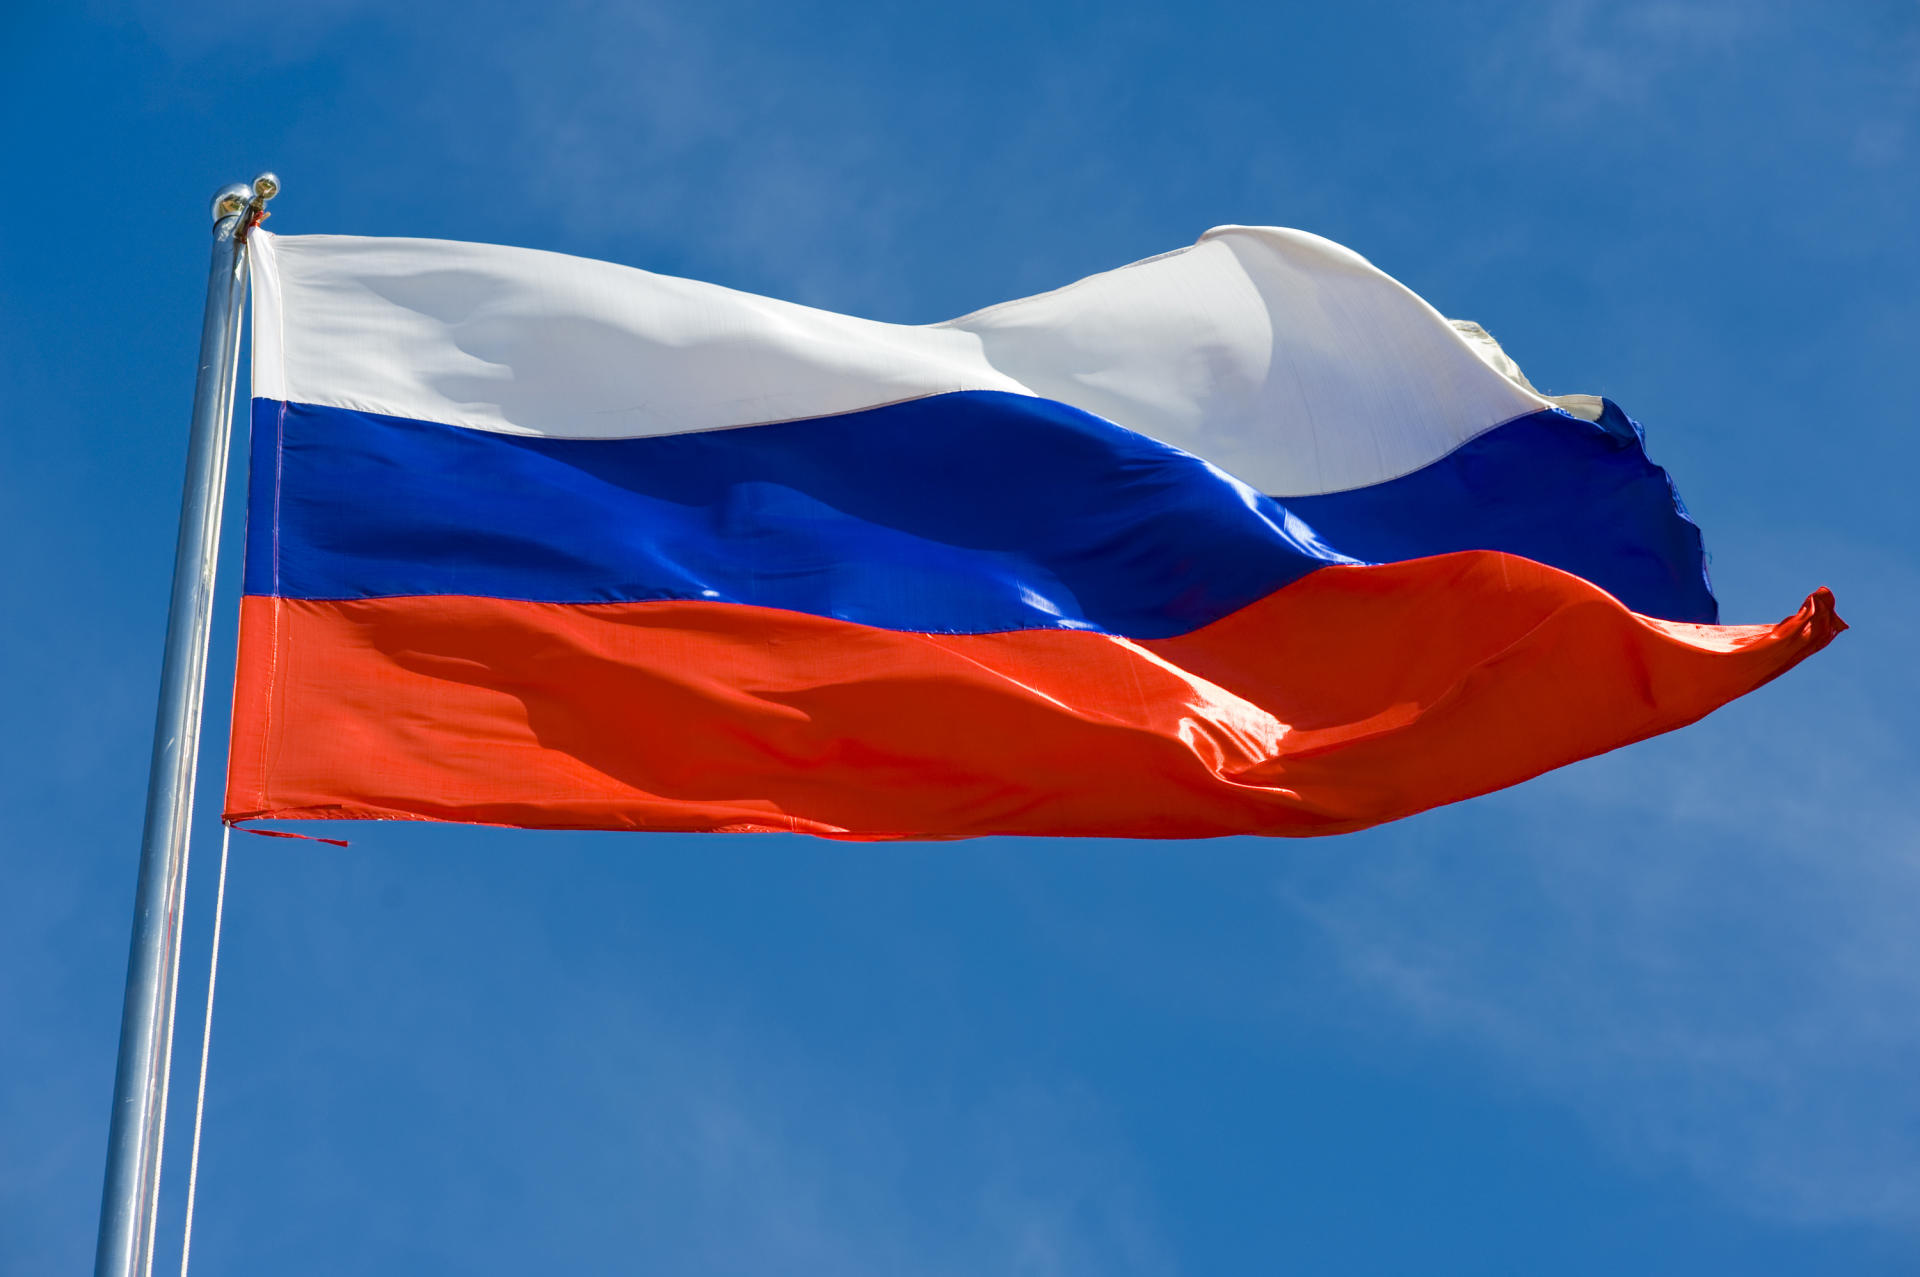 Where will energy investments shift from Russia?